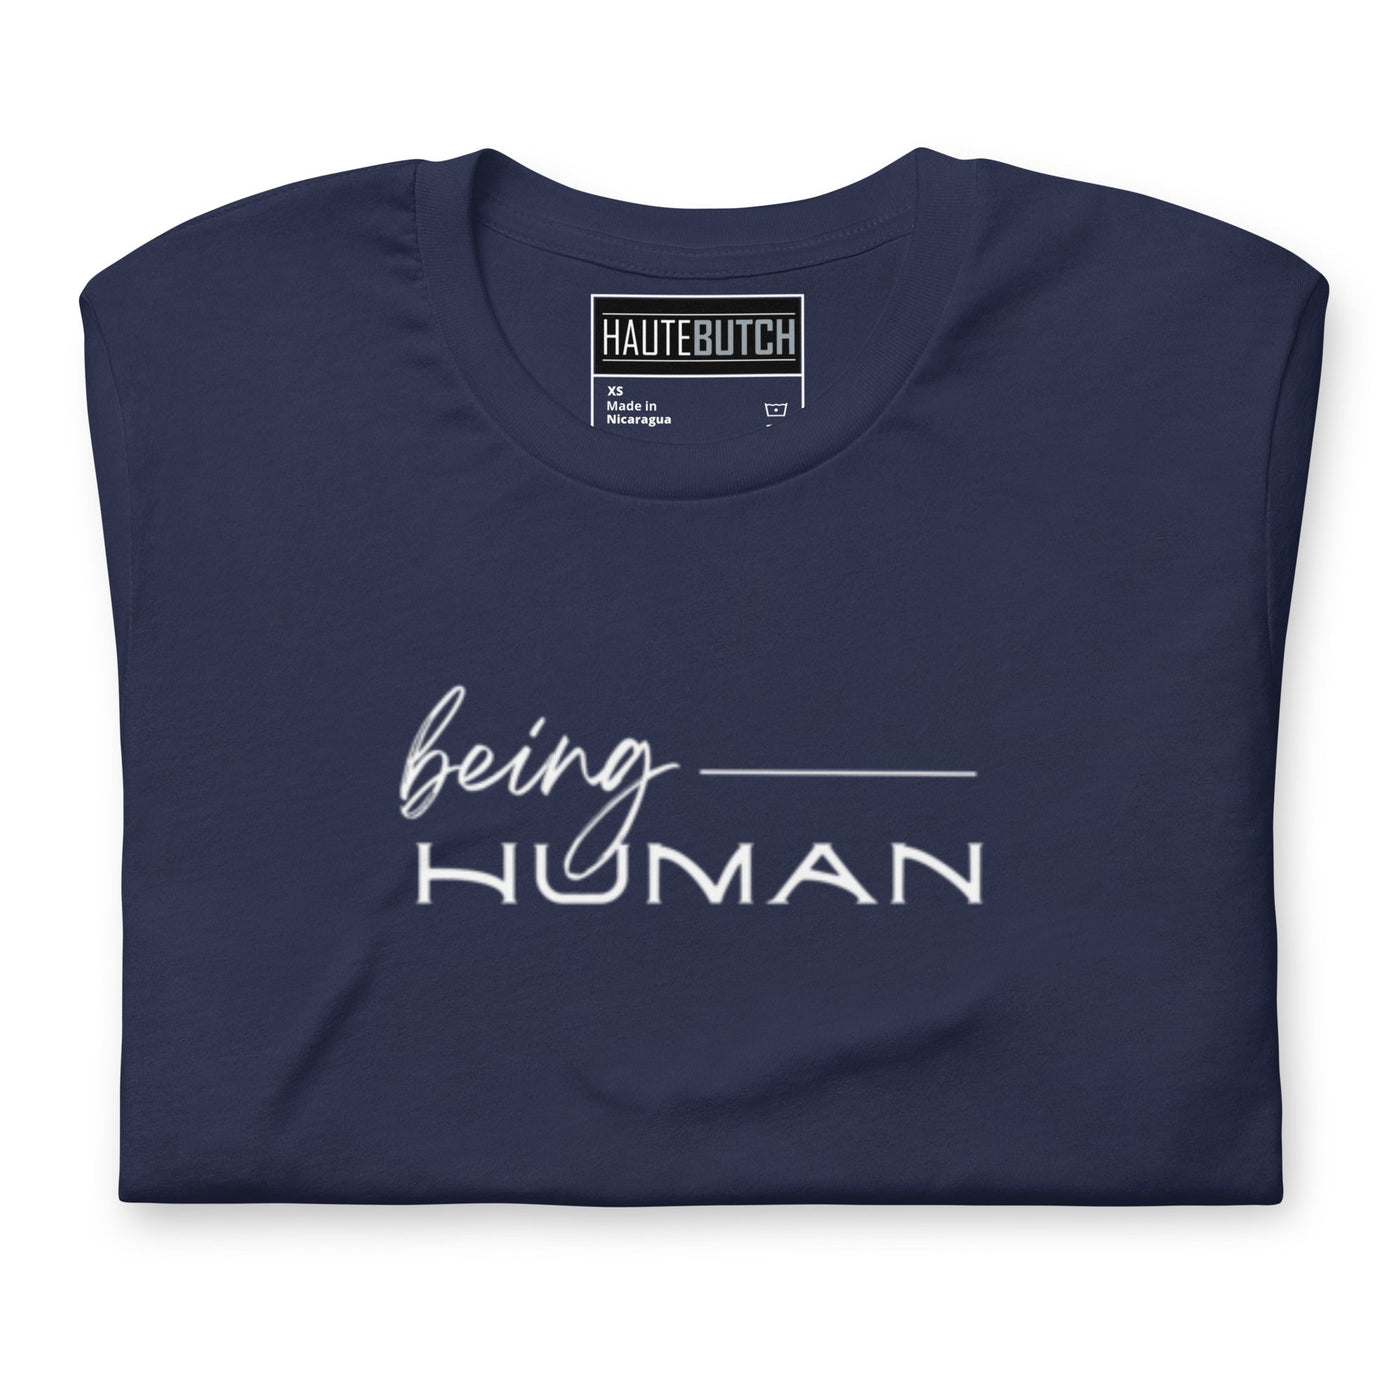 Being Human.... being.... t-shirt - HAUTEBUTCH - casual, spo-default, spo-disabled, spo-notify-me-disabled, tees, tshirts